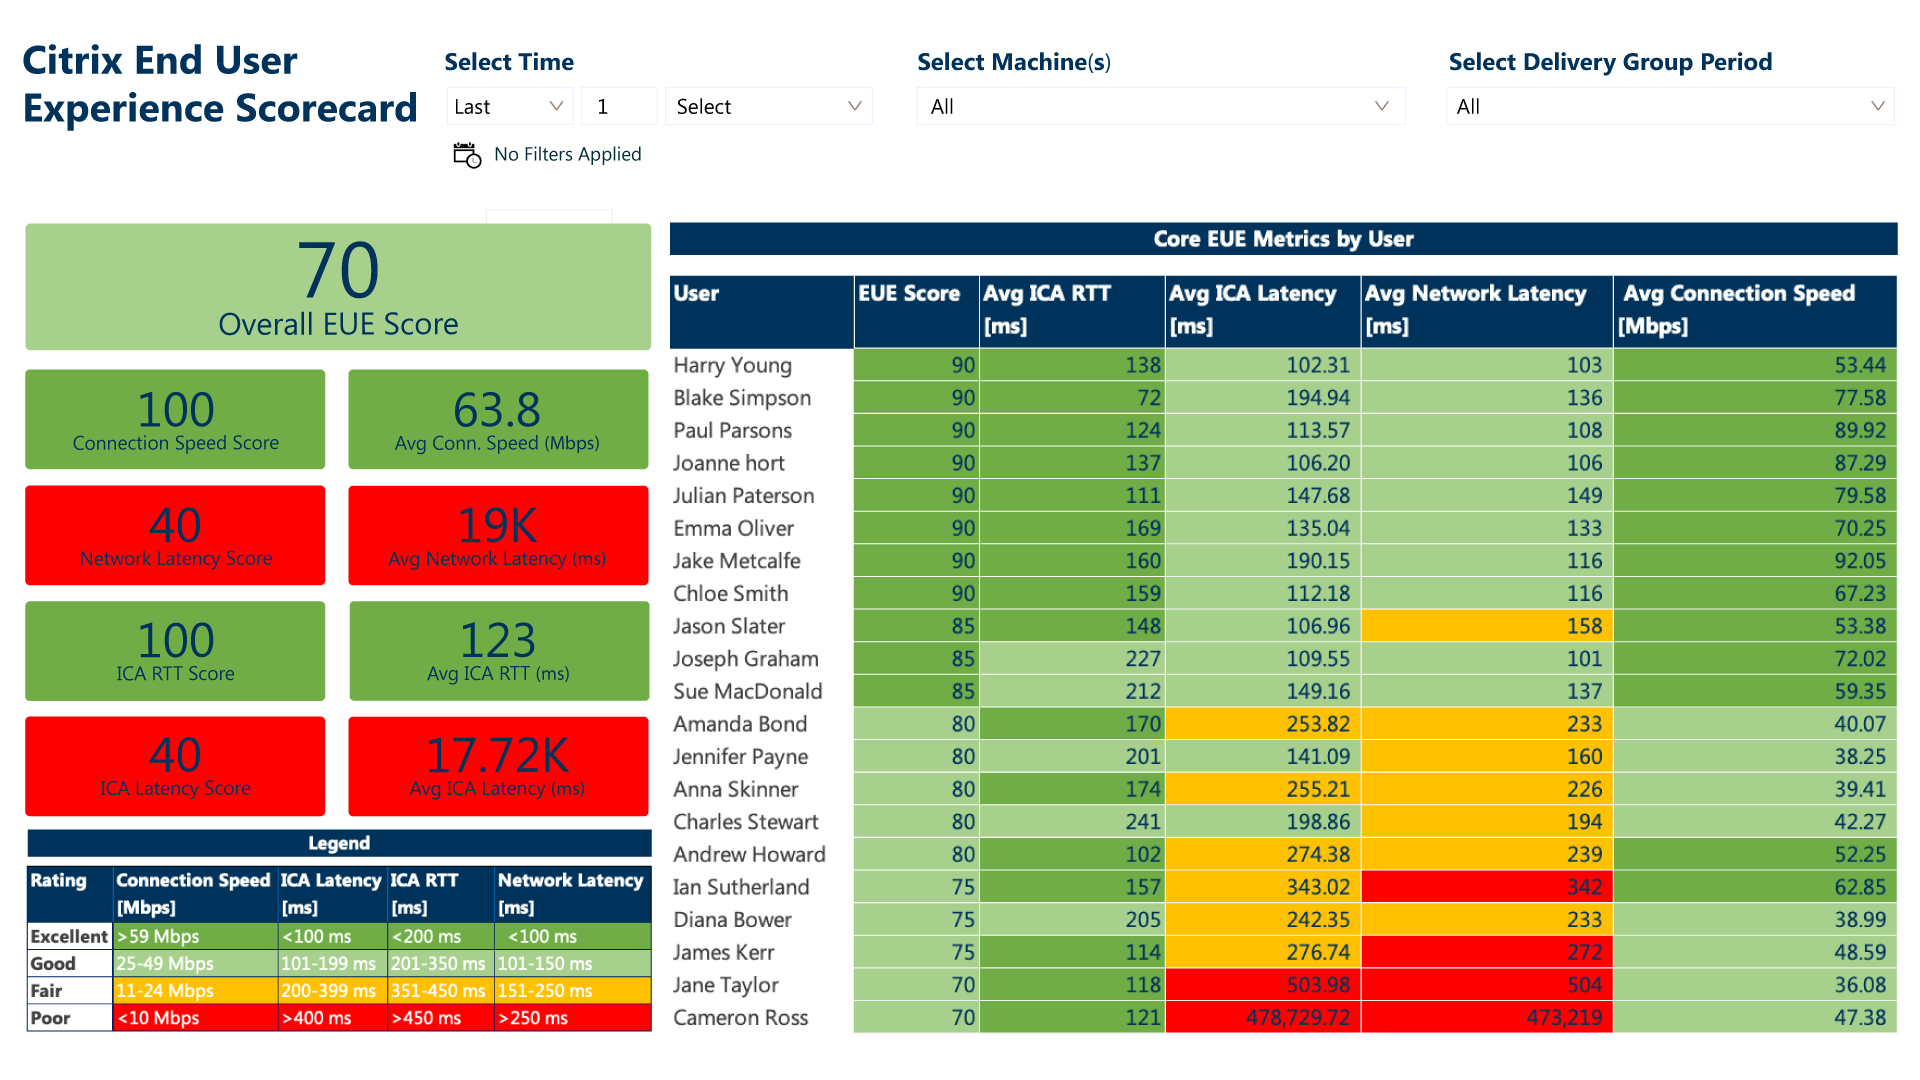 Goliath Performance Monitor Software - The End User Experience Scorecard offers insights into how your end users' experience compares to industry best practices. With objective data, you can now report on to management with definitive proof of end user experience forensics.